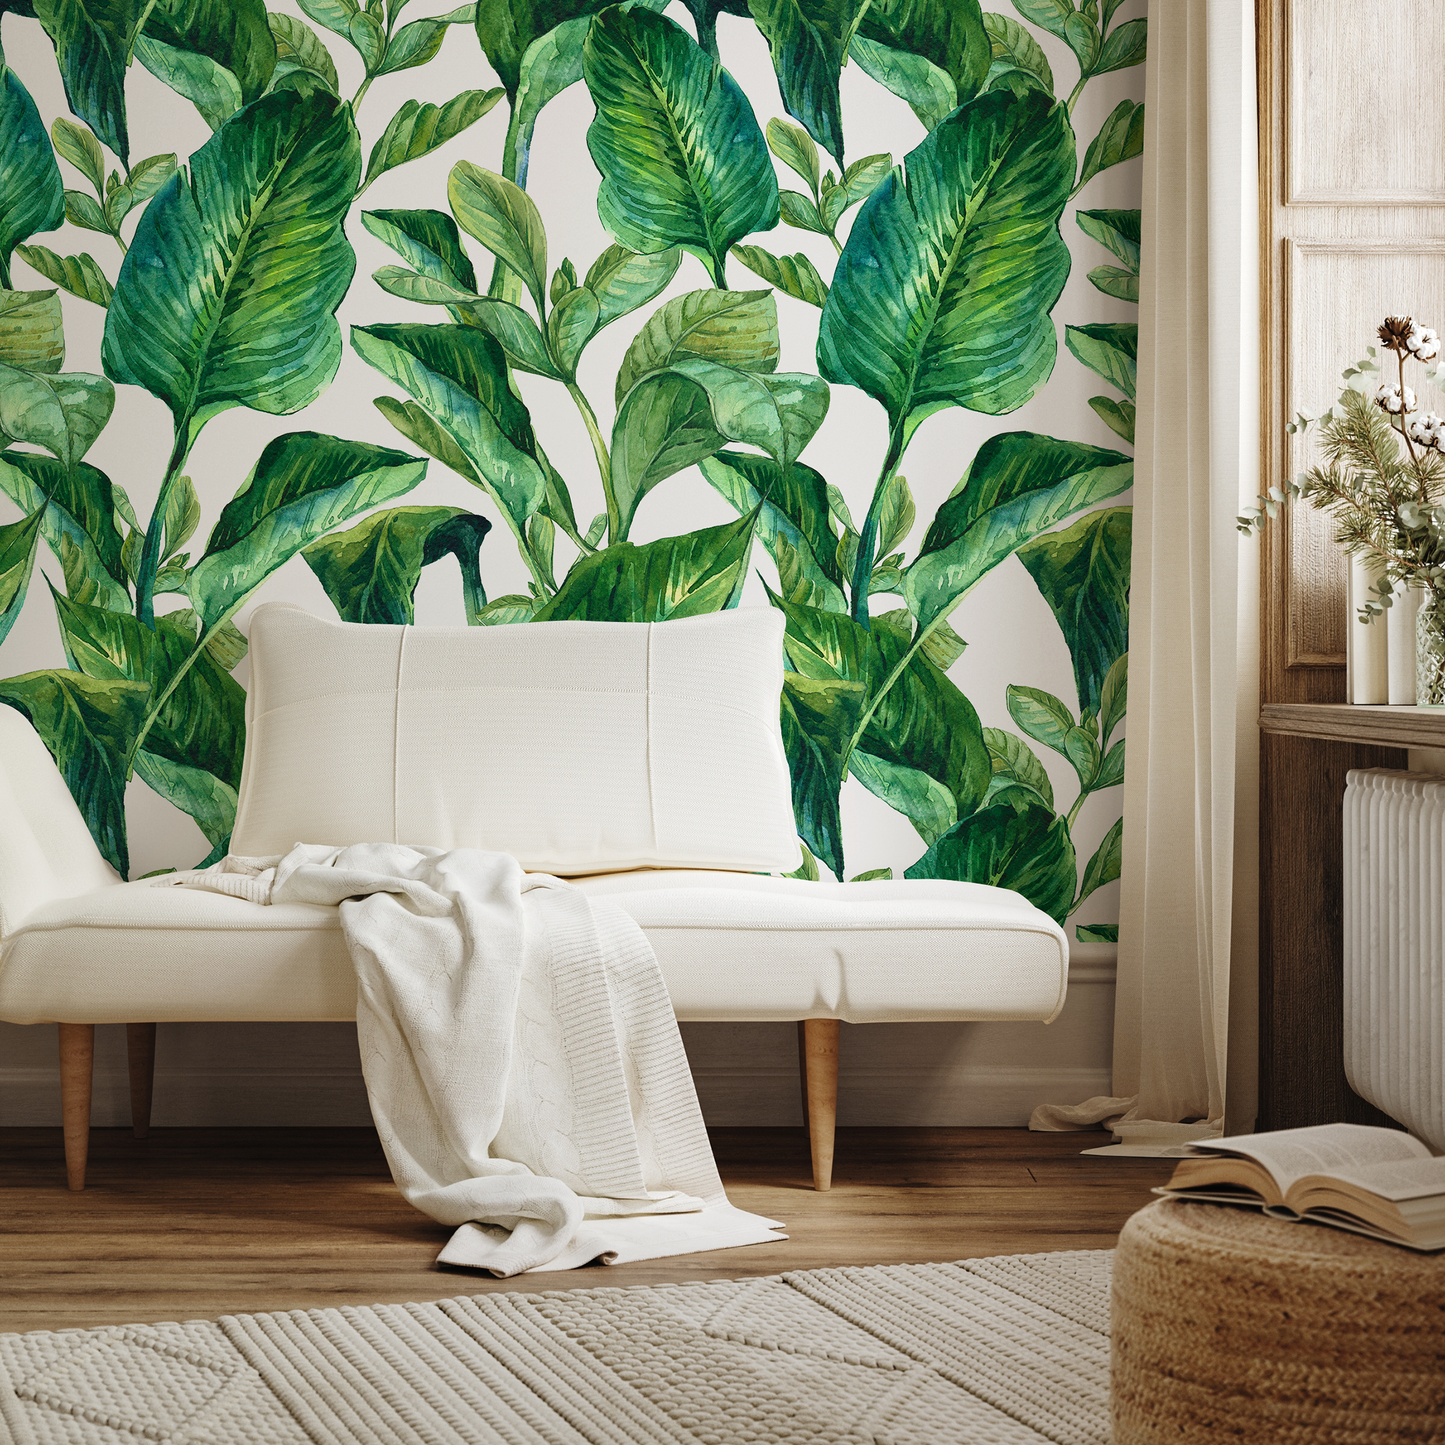 Wallpaper Peel and Stick Wallpaper Removable Wallpaper  Temporary Wallpaper  Home Decor Room Decor / Tropical Botanical Leaf - A205